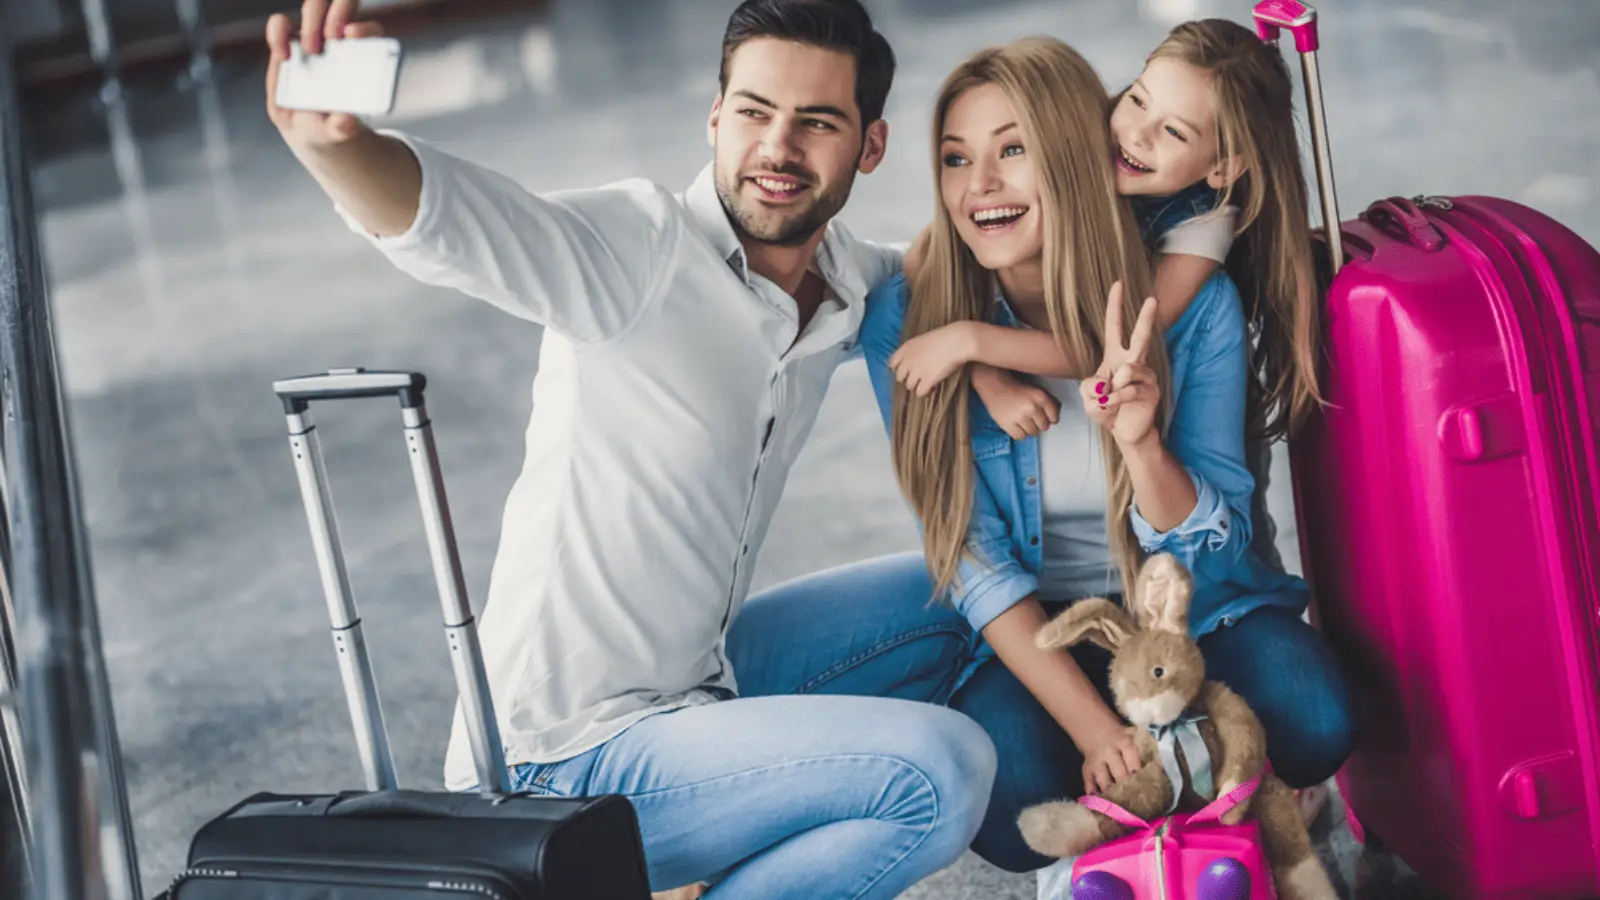 family travel airport suitcases travel